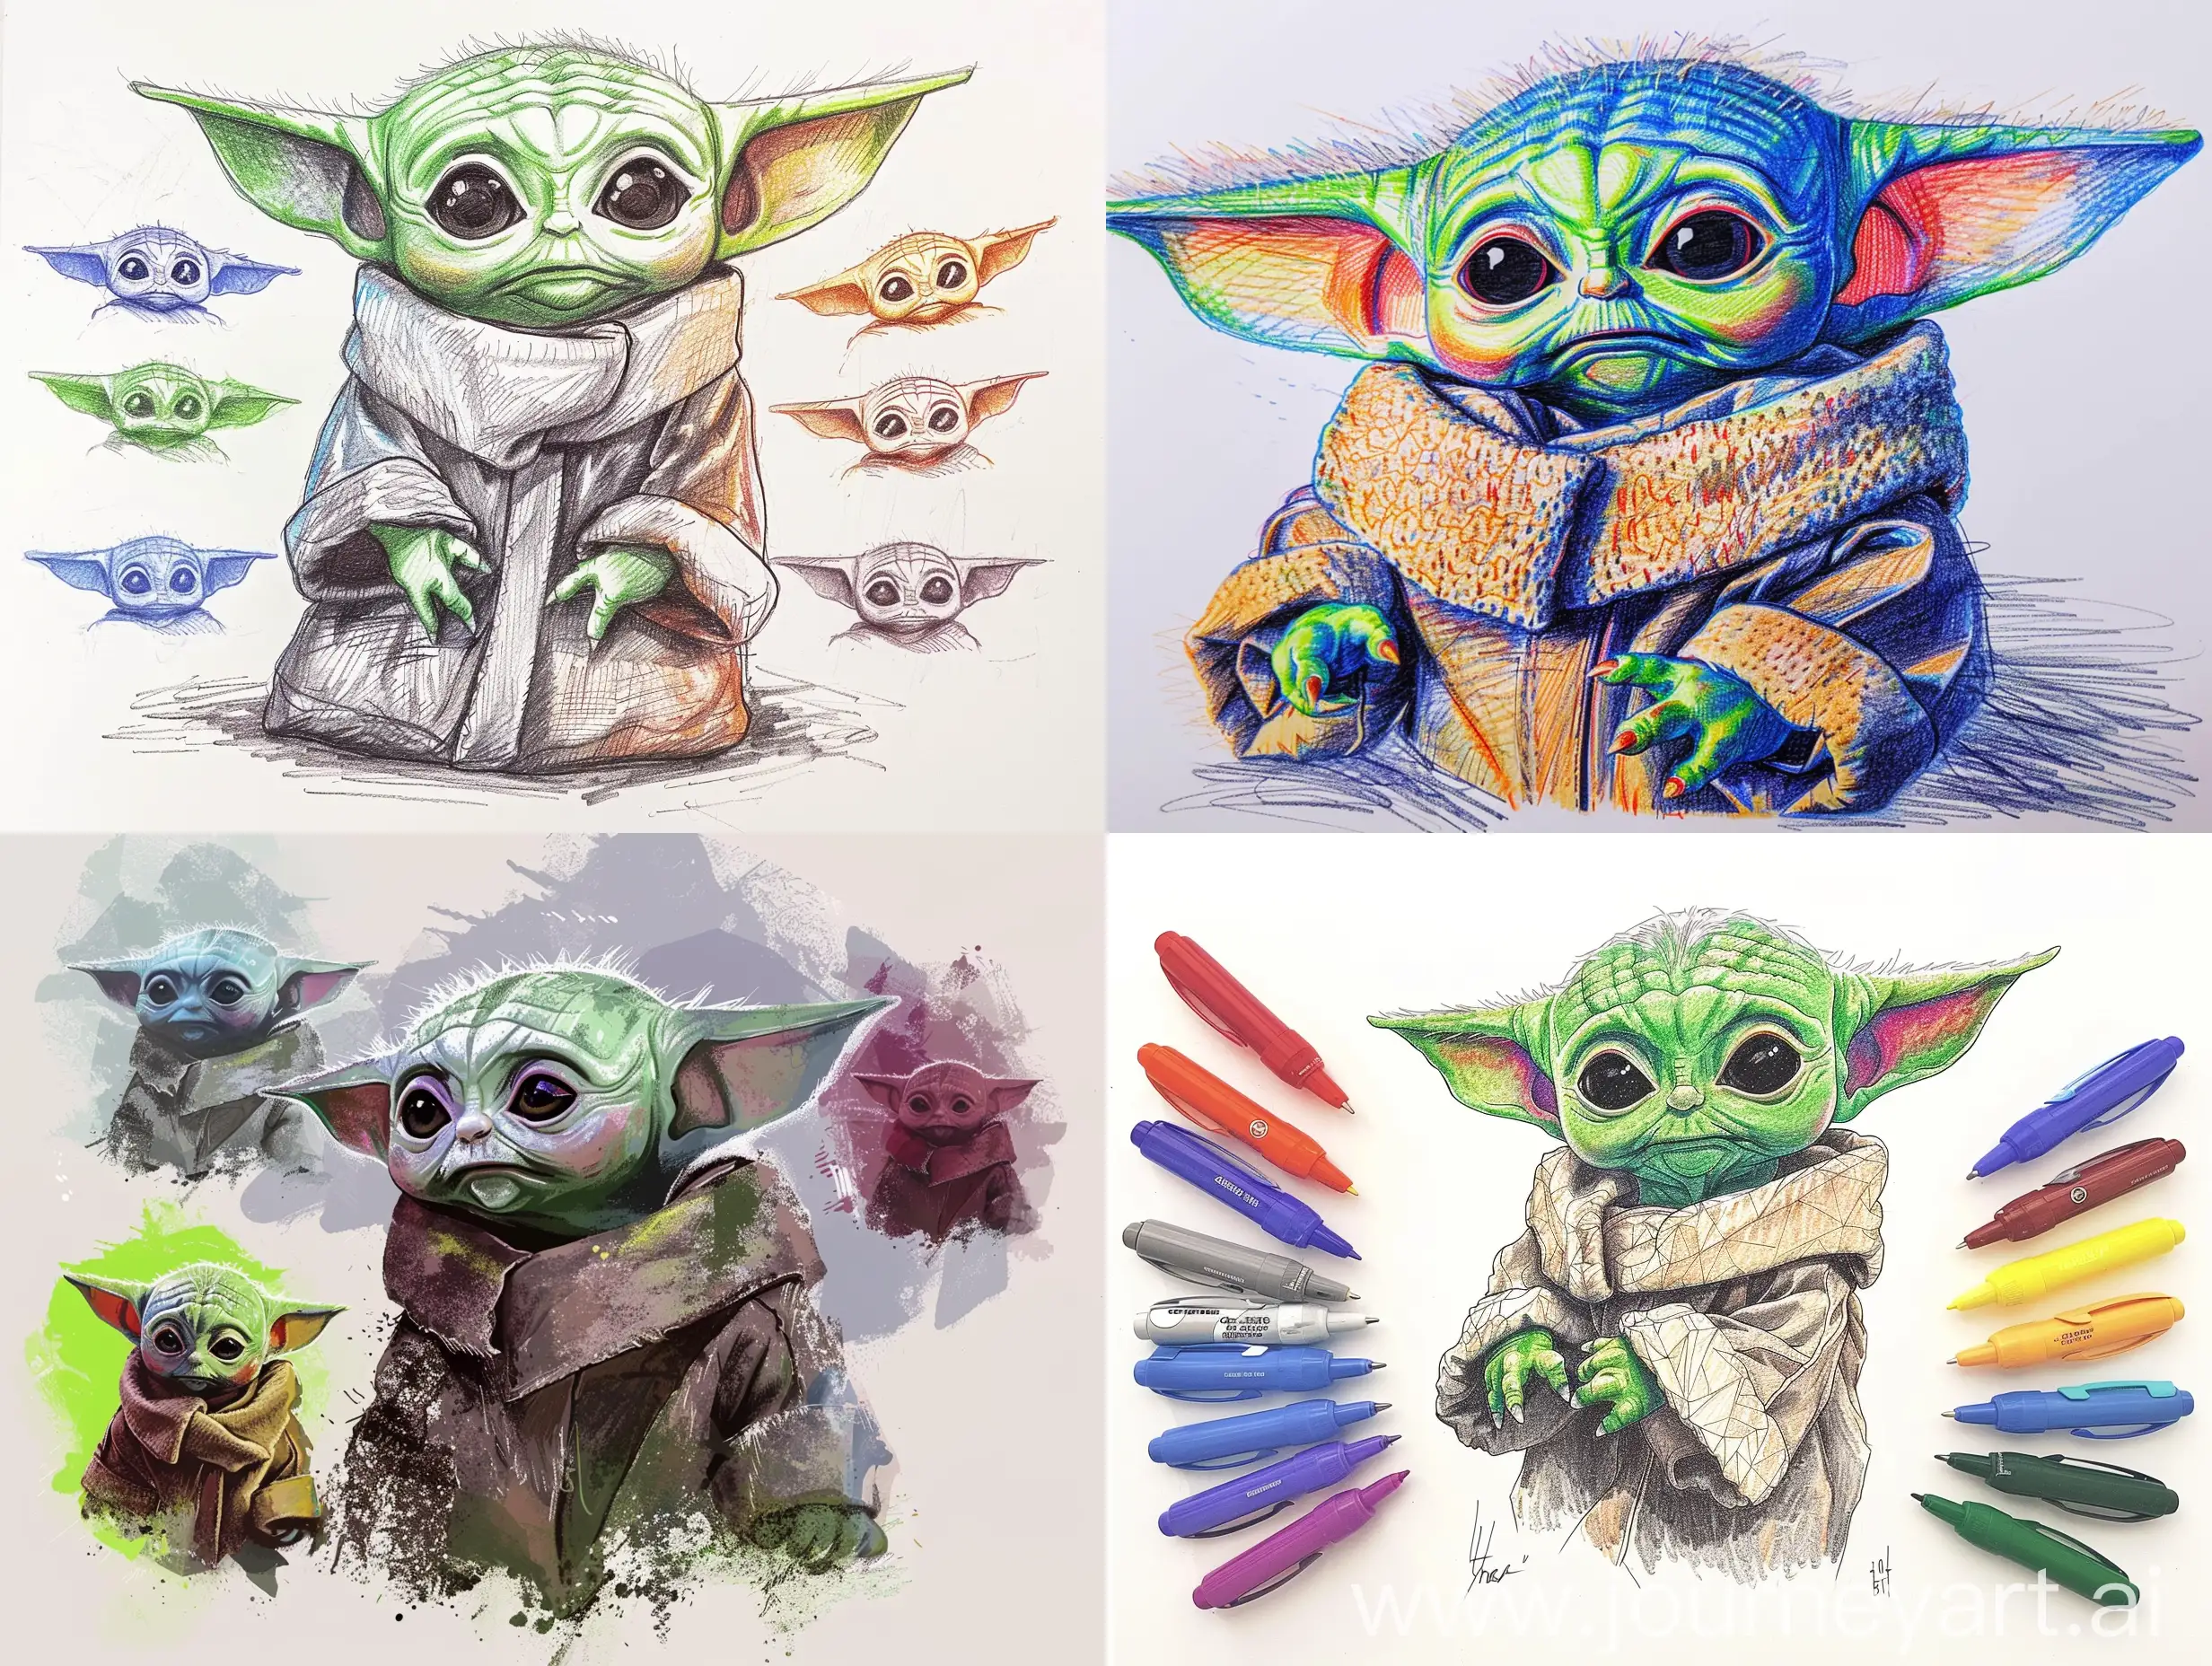 pen sketch of baby yoda with different colors